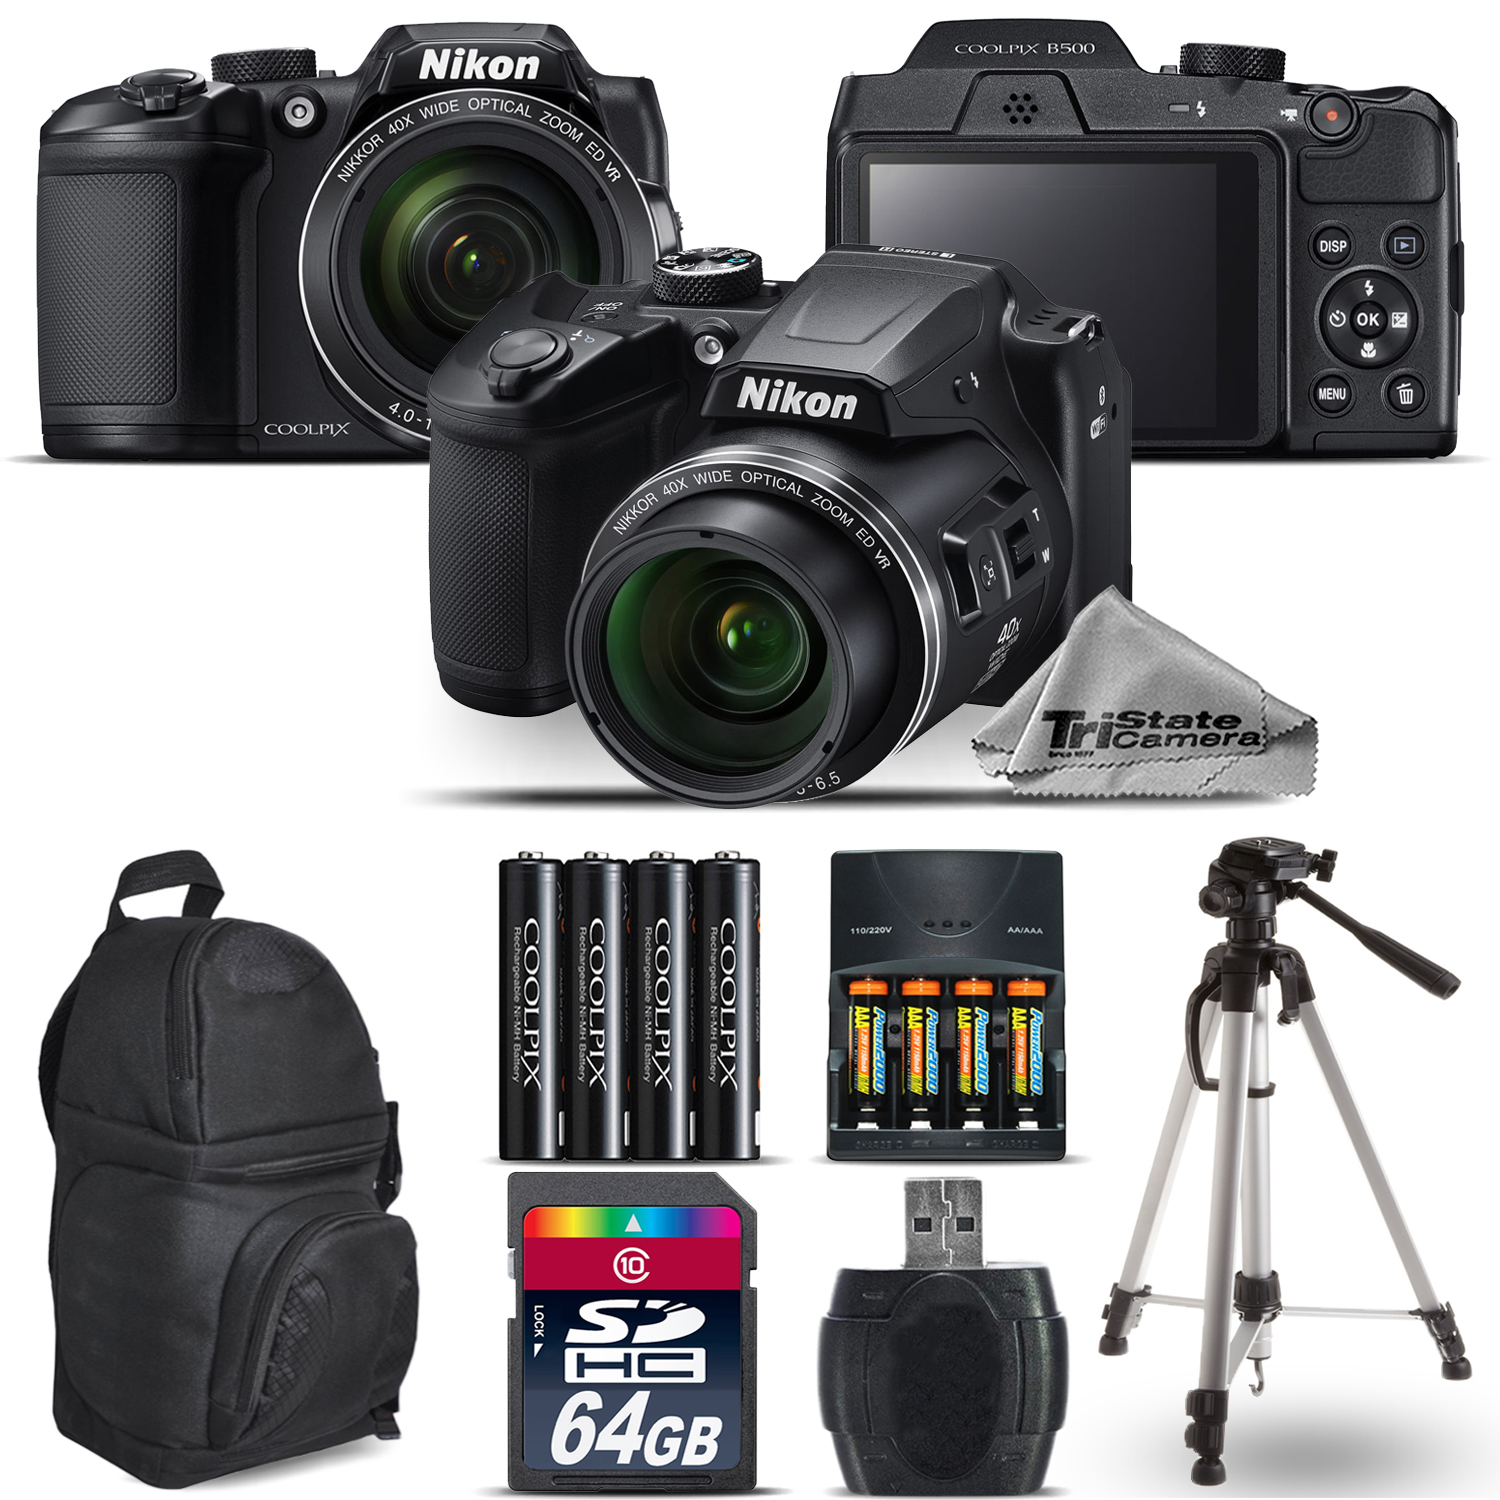 COOLPIX B500 Camera 40x Optical Zoom + Extra Battery + Backpack -64GB Kit *FREE SHIPPING*